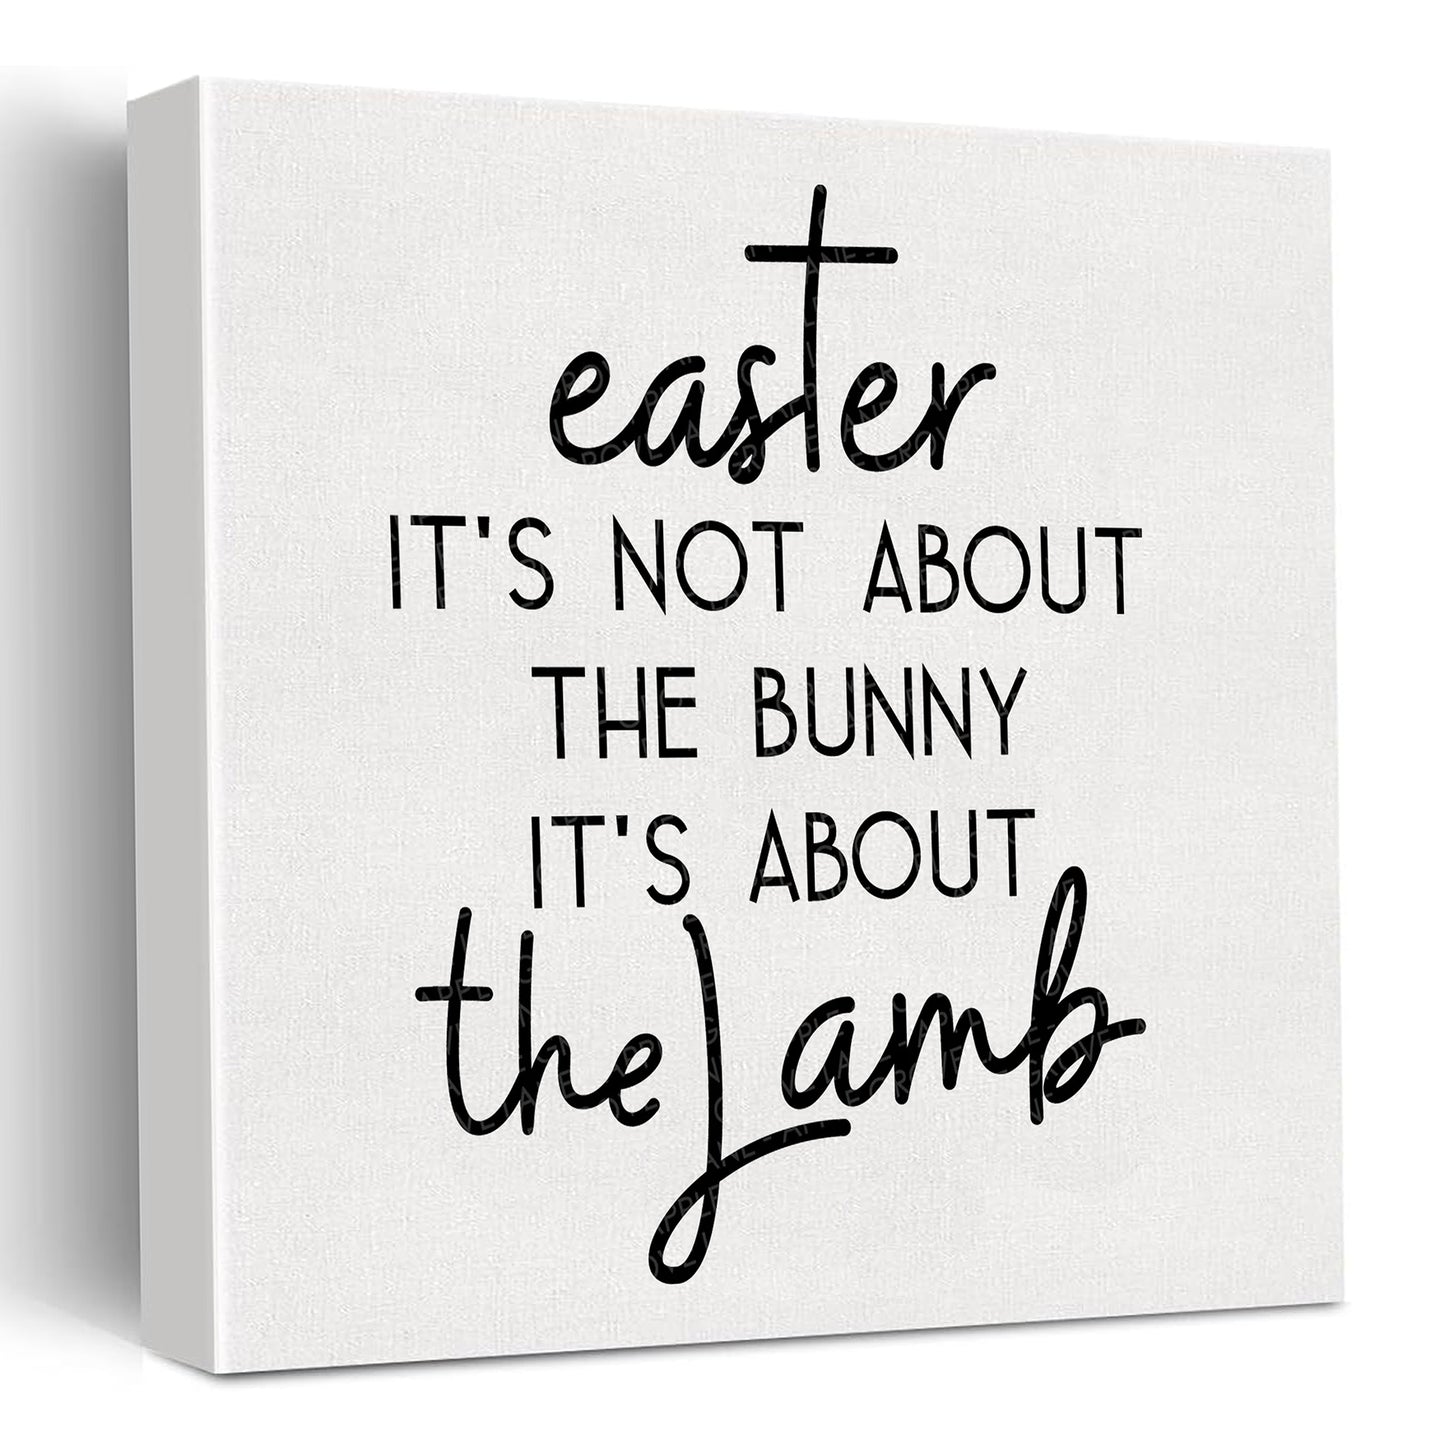 Easter Is About The Lamb - Small Wooden Sign 15cm X 15cm - Christian Easter Decor